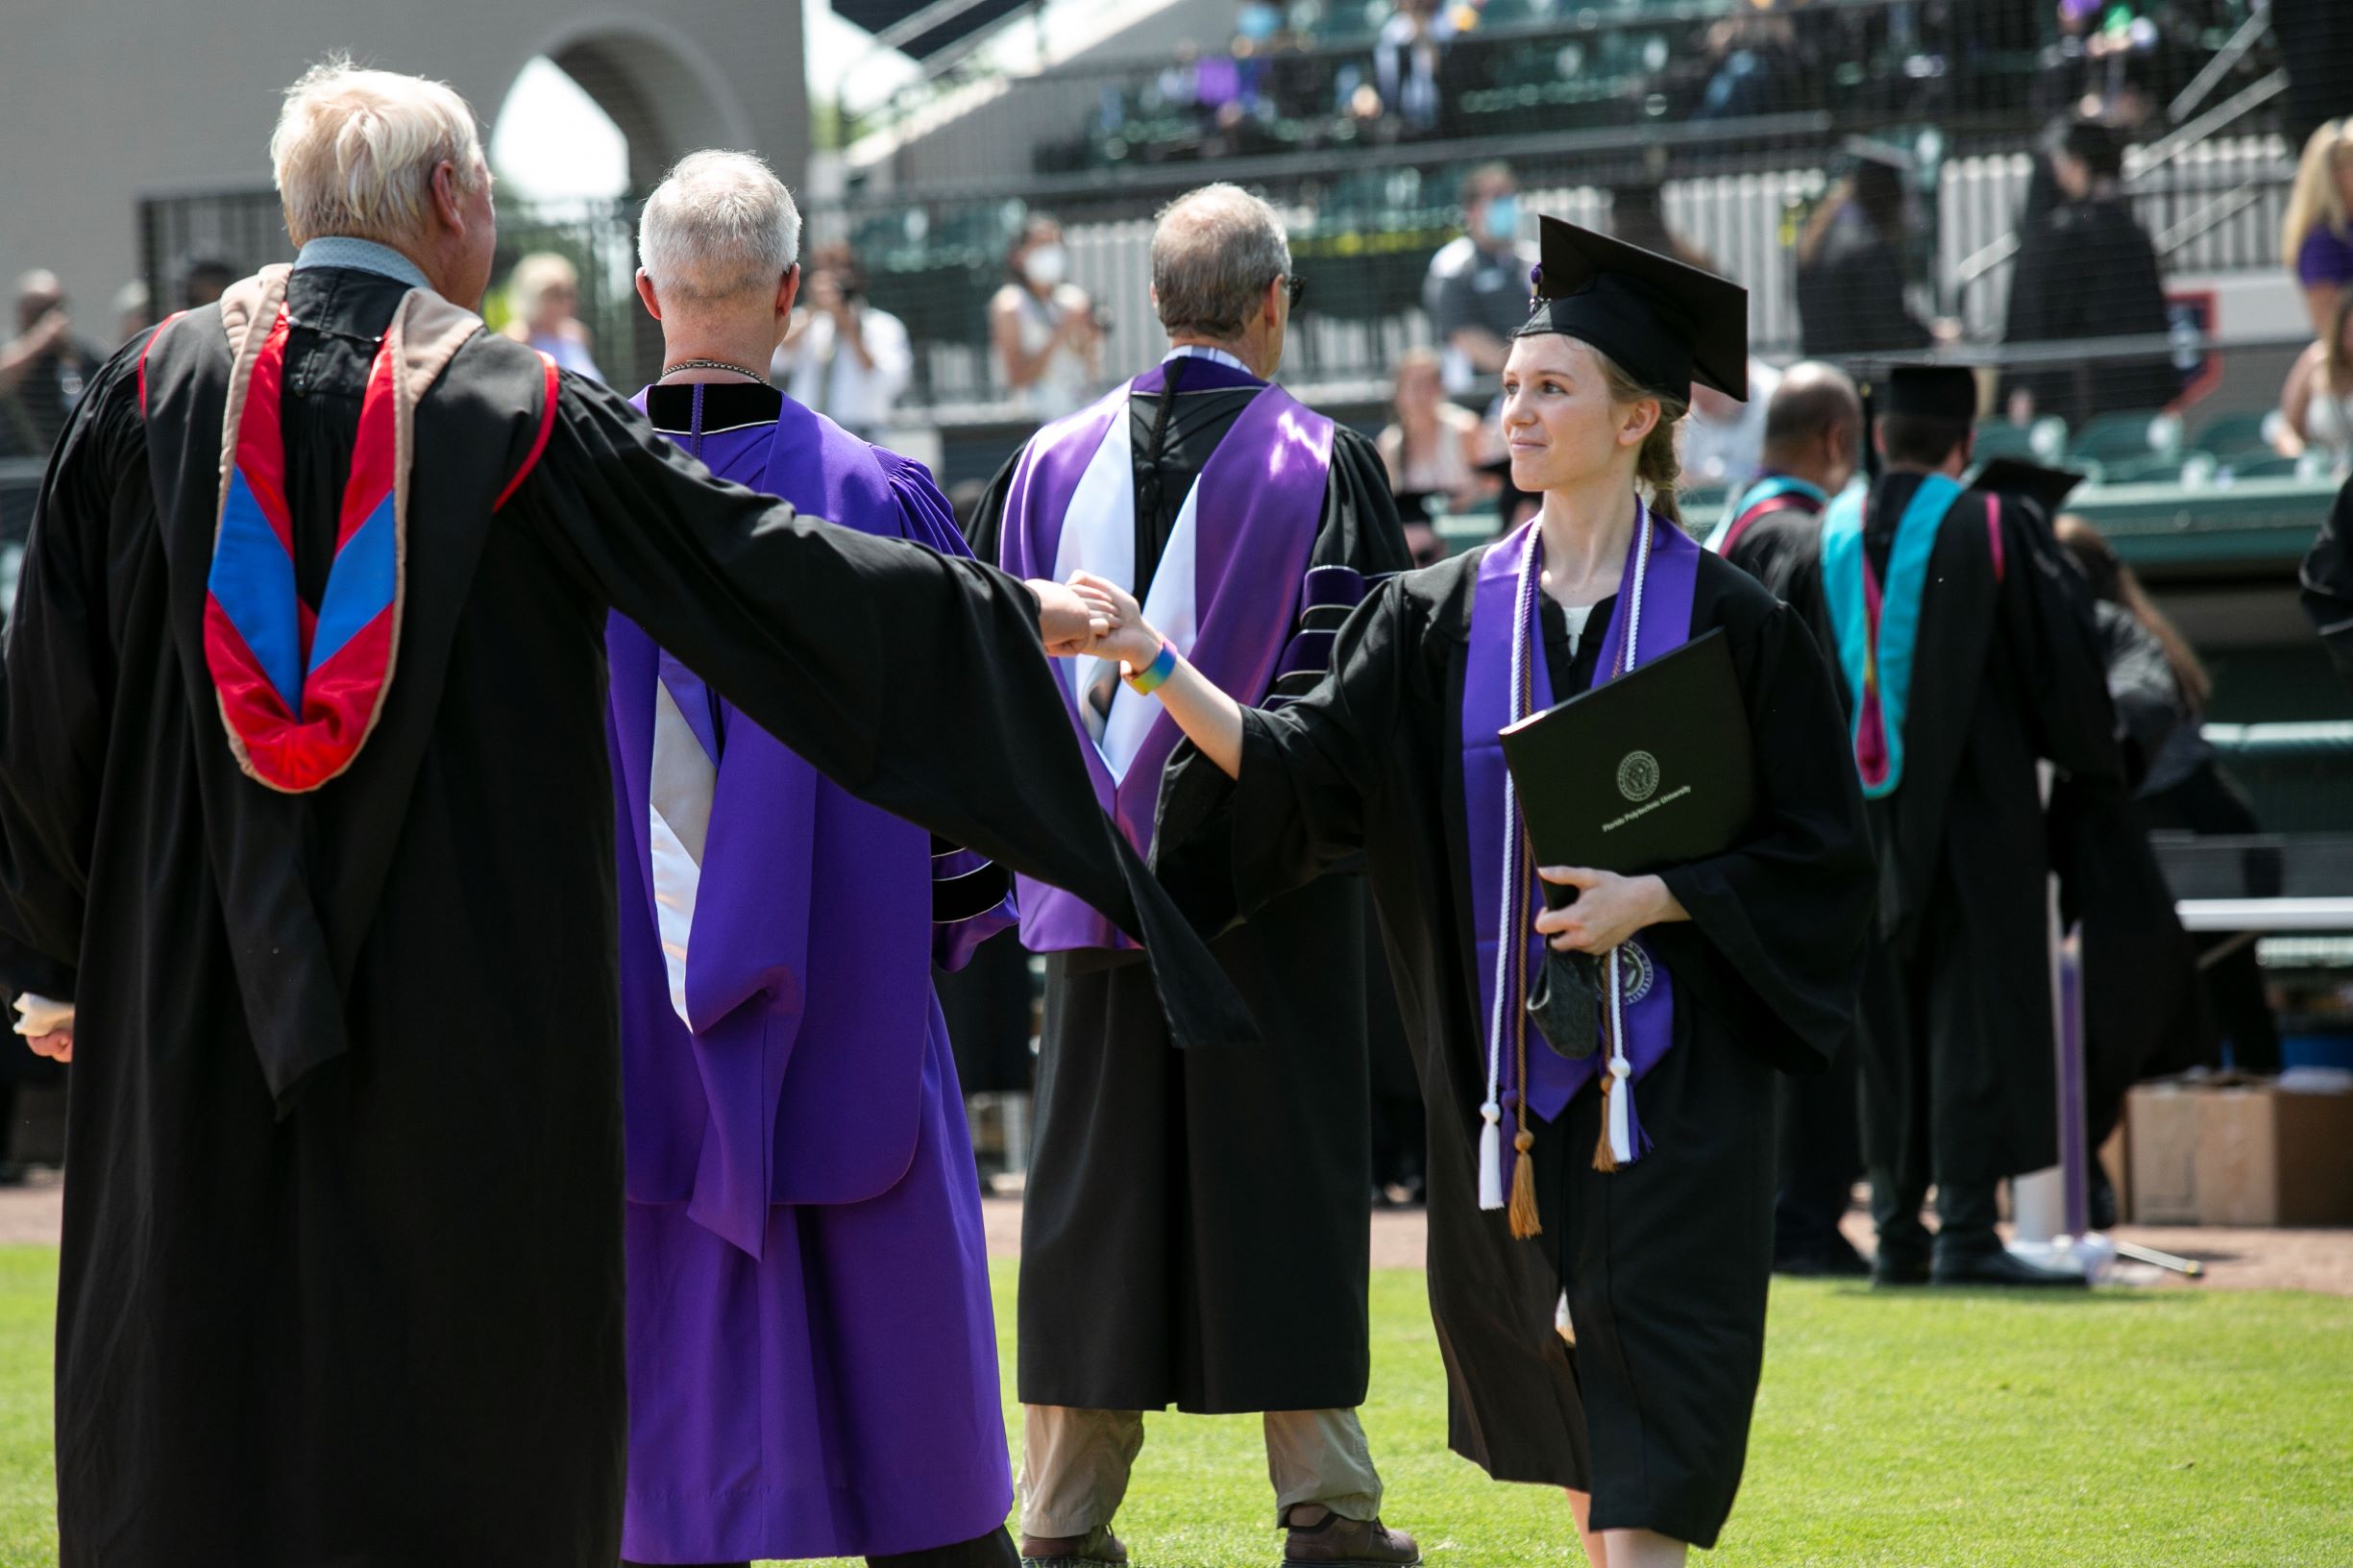 Florida Polytechnic University celebrated the graduation of its classes of 2020 and 2021 on Sunday, May 2, at Publix Field at Joker Marchant Stadium in Lakeland, Florida.